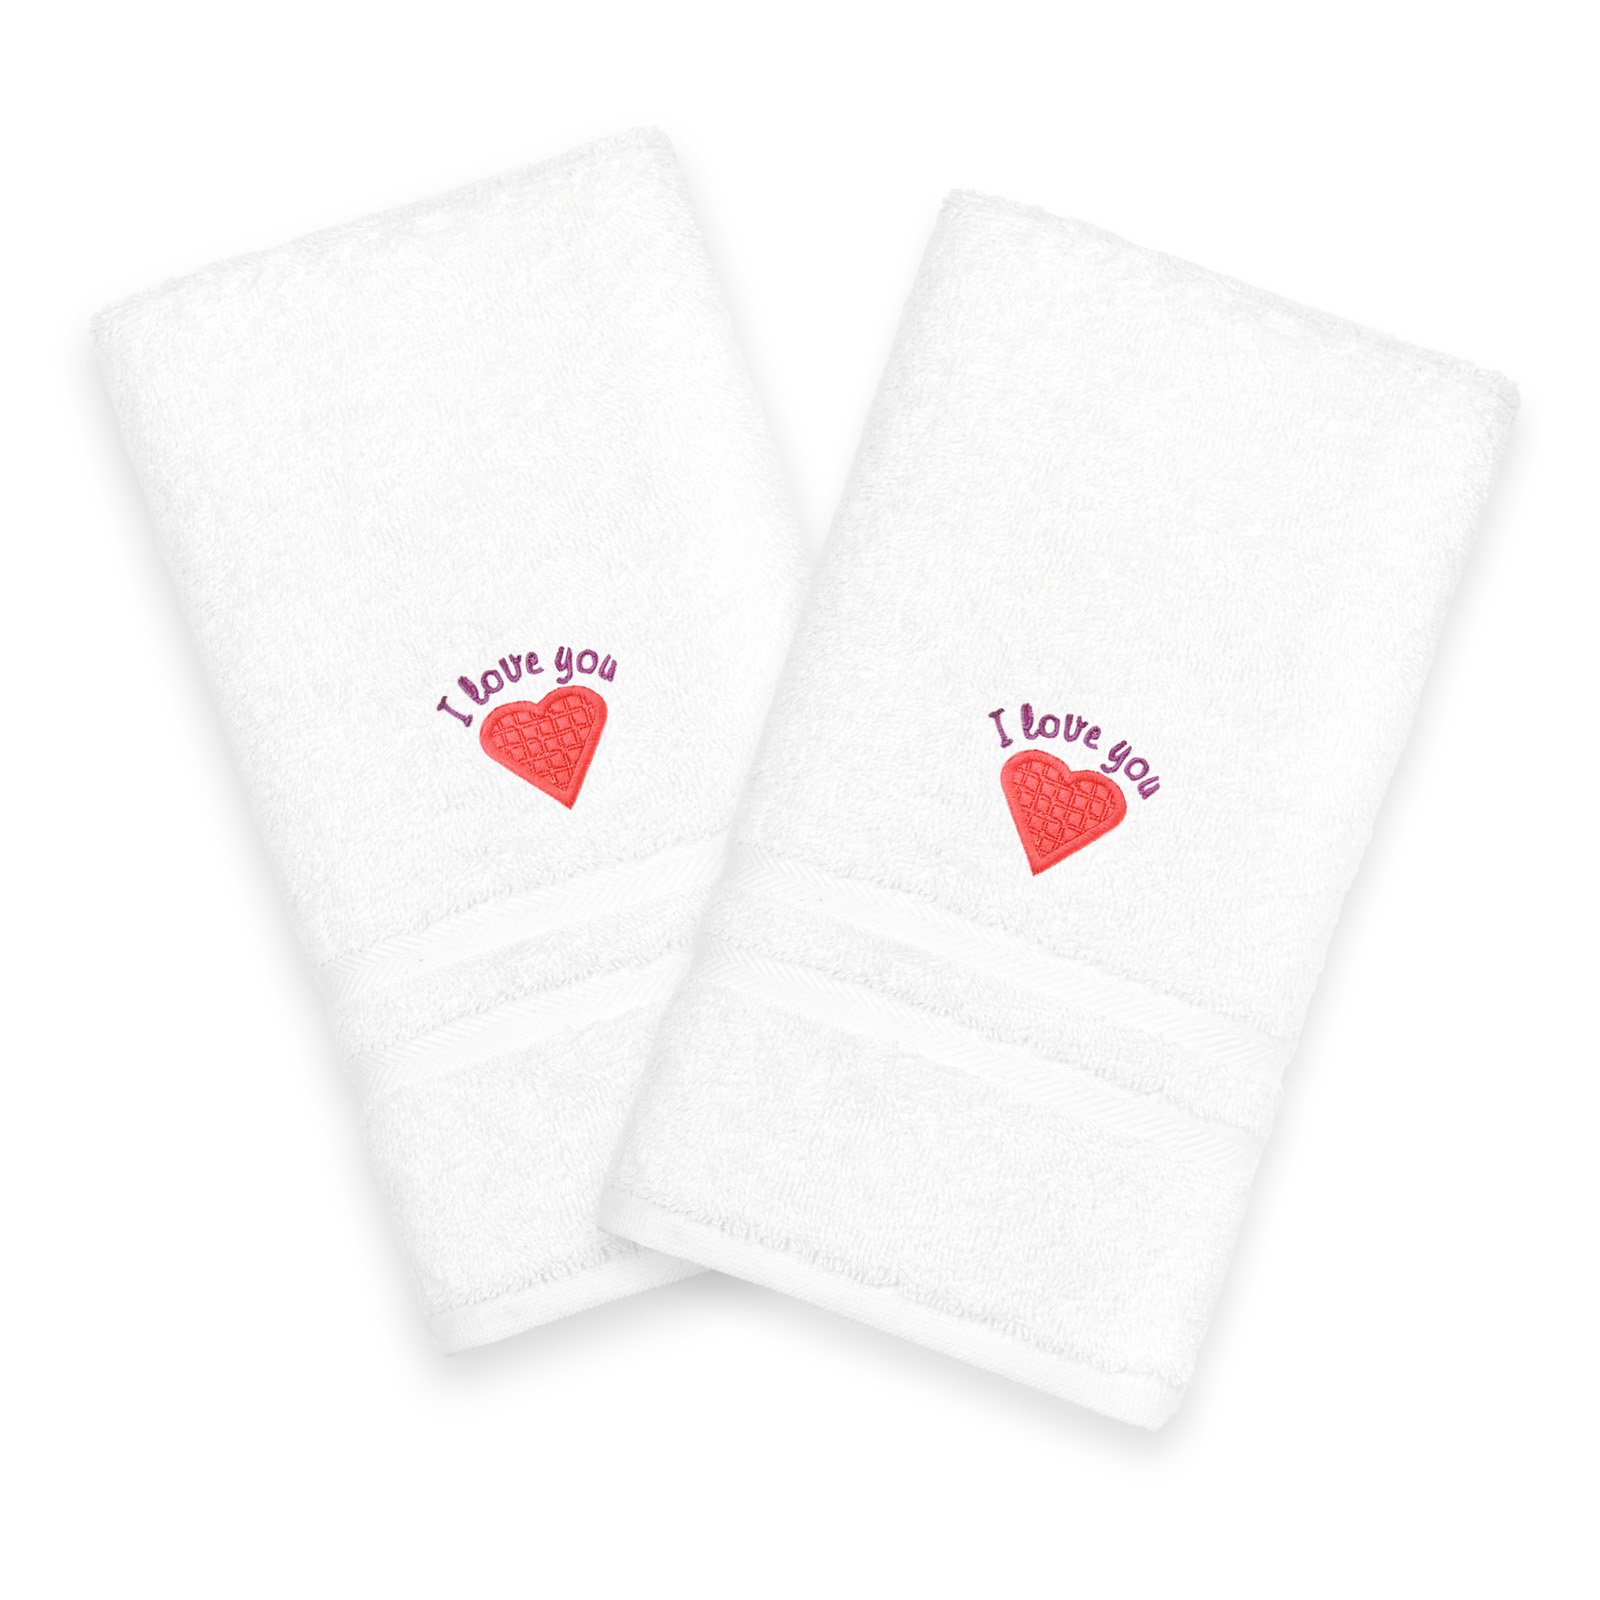 Linum Home Textiles Pink Heart I Love You Embroidered White Hand Towels - Set of 2 - image 2 of 2